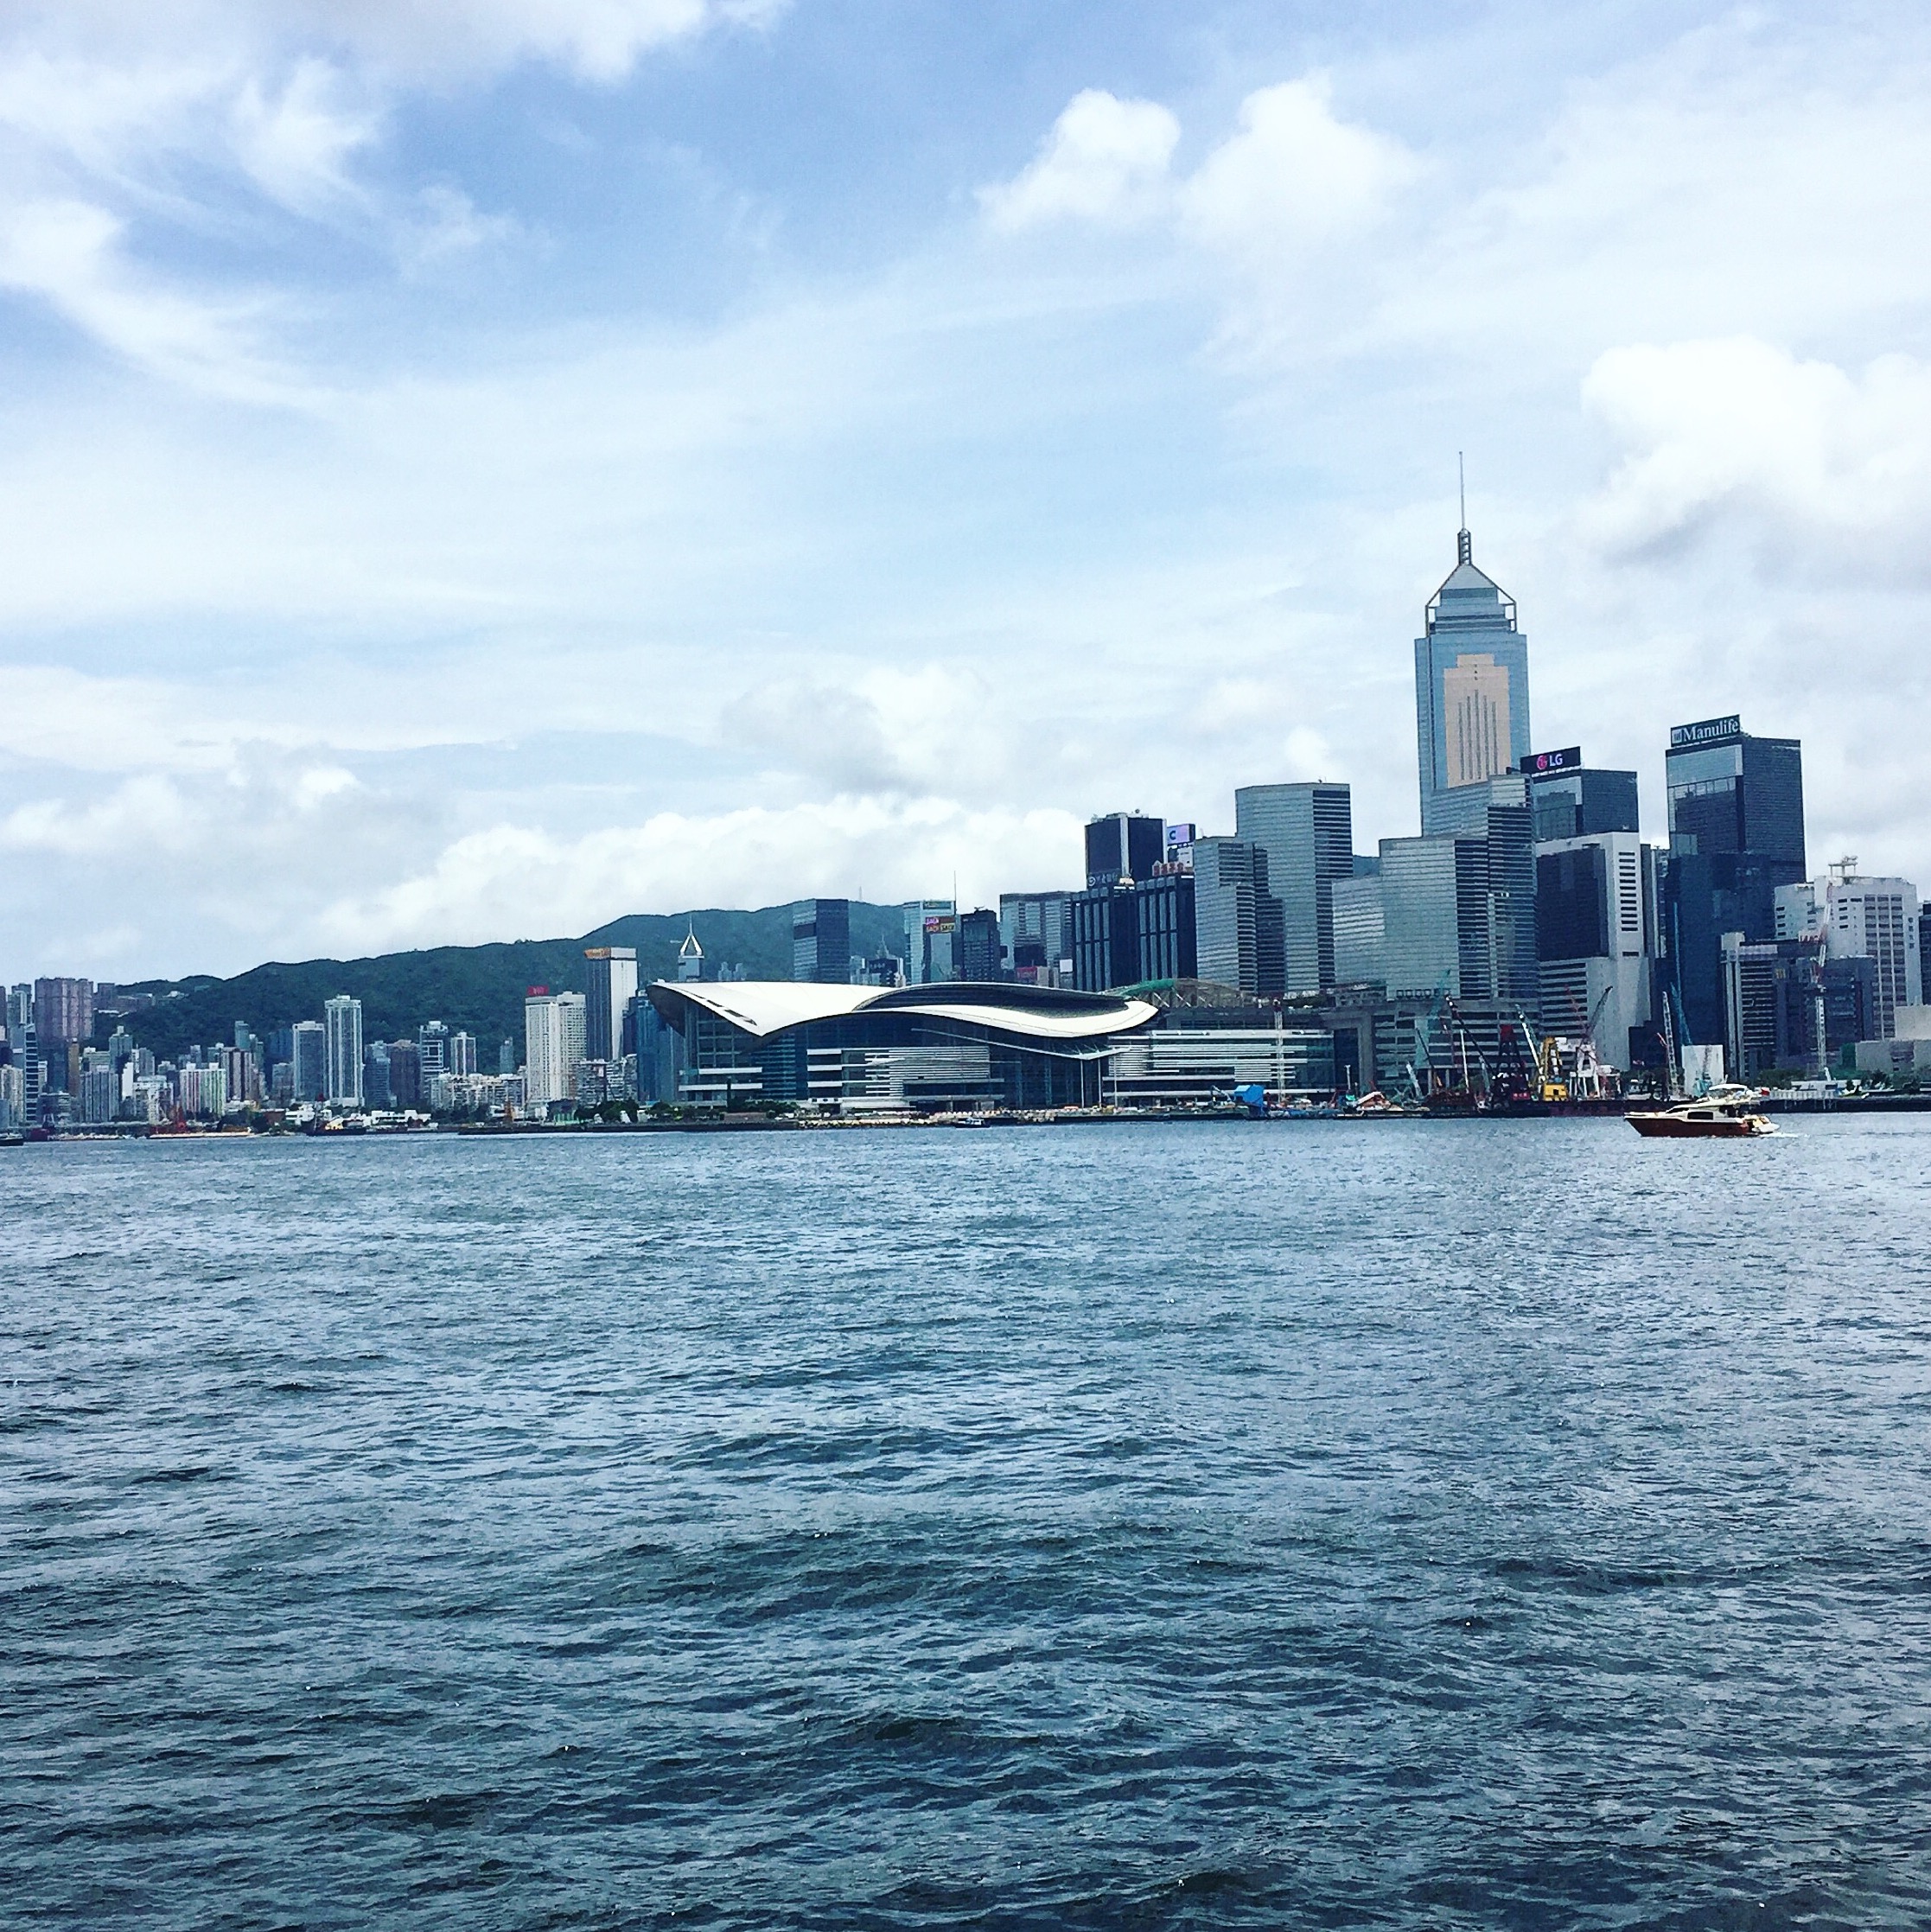 Image taken from a ferry in Hong Kong